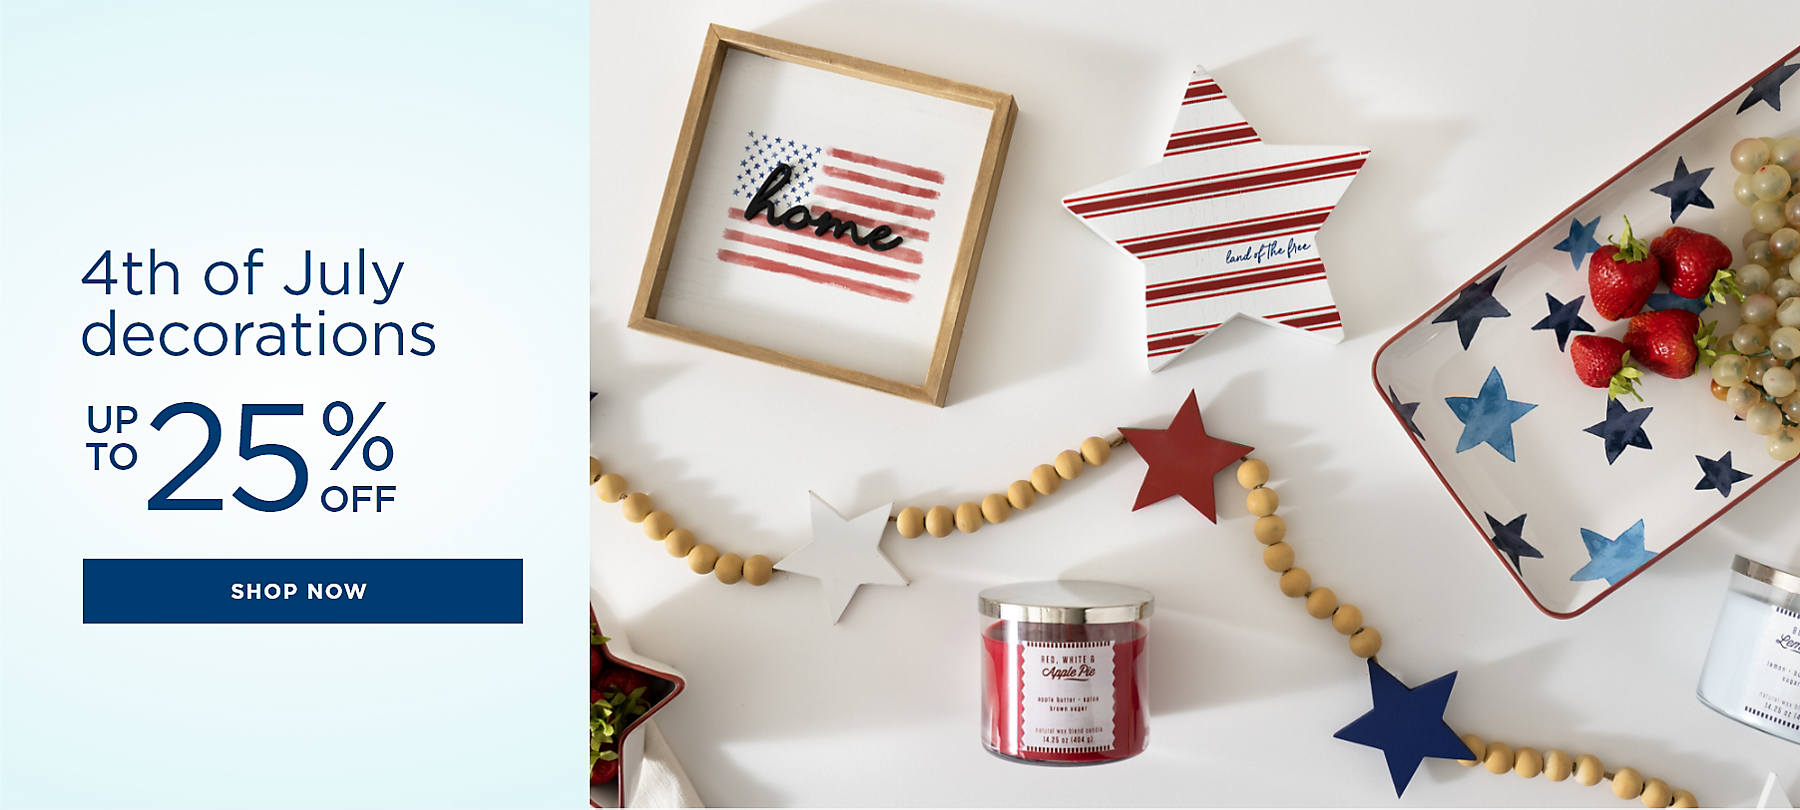 4th of July decorations up to 25% off shop now